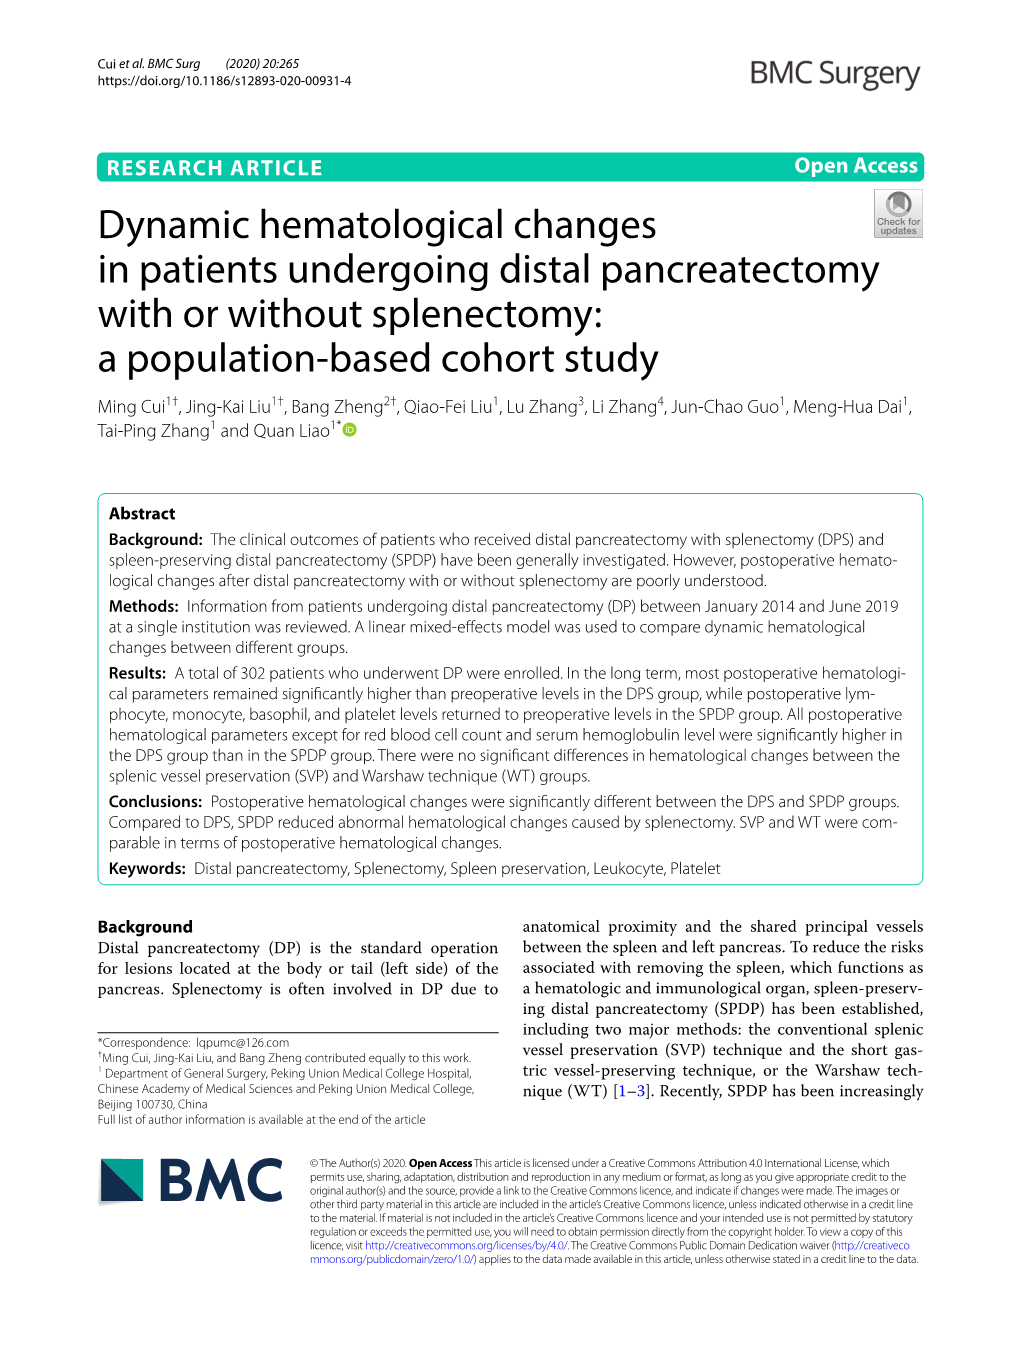 Dynamic Hematological Changes in Patients Undergoing